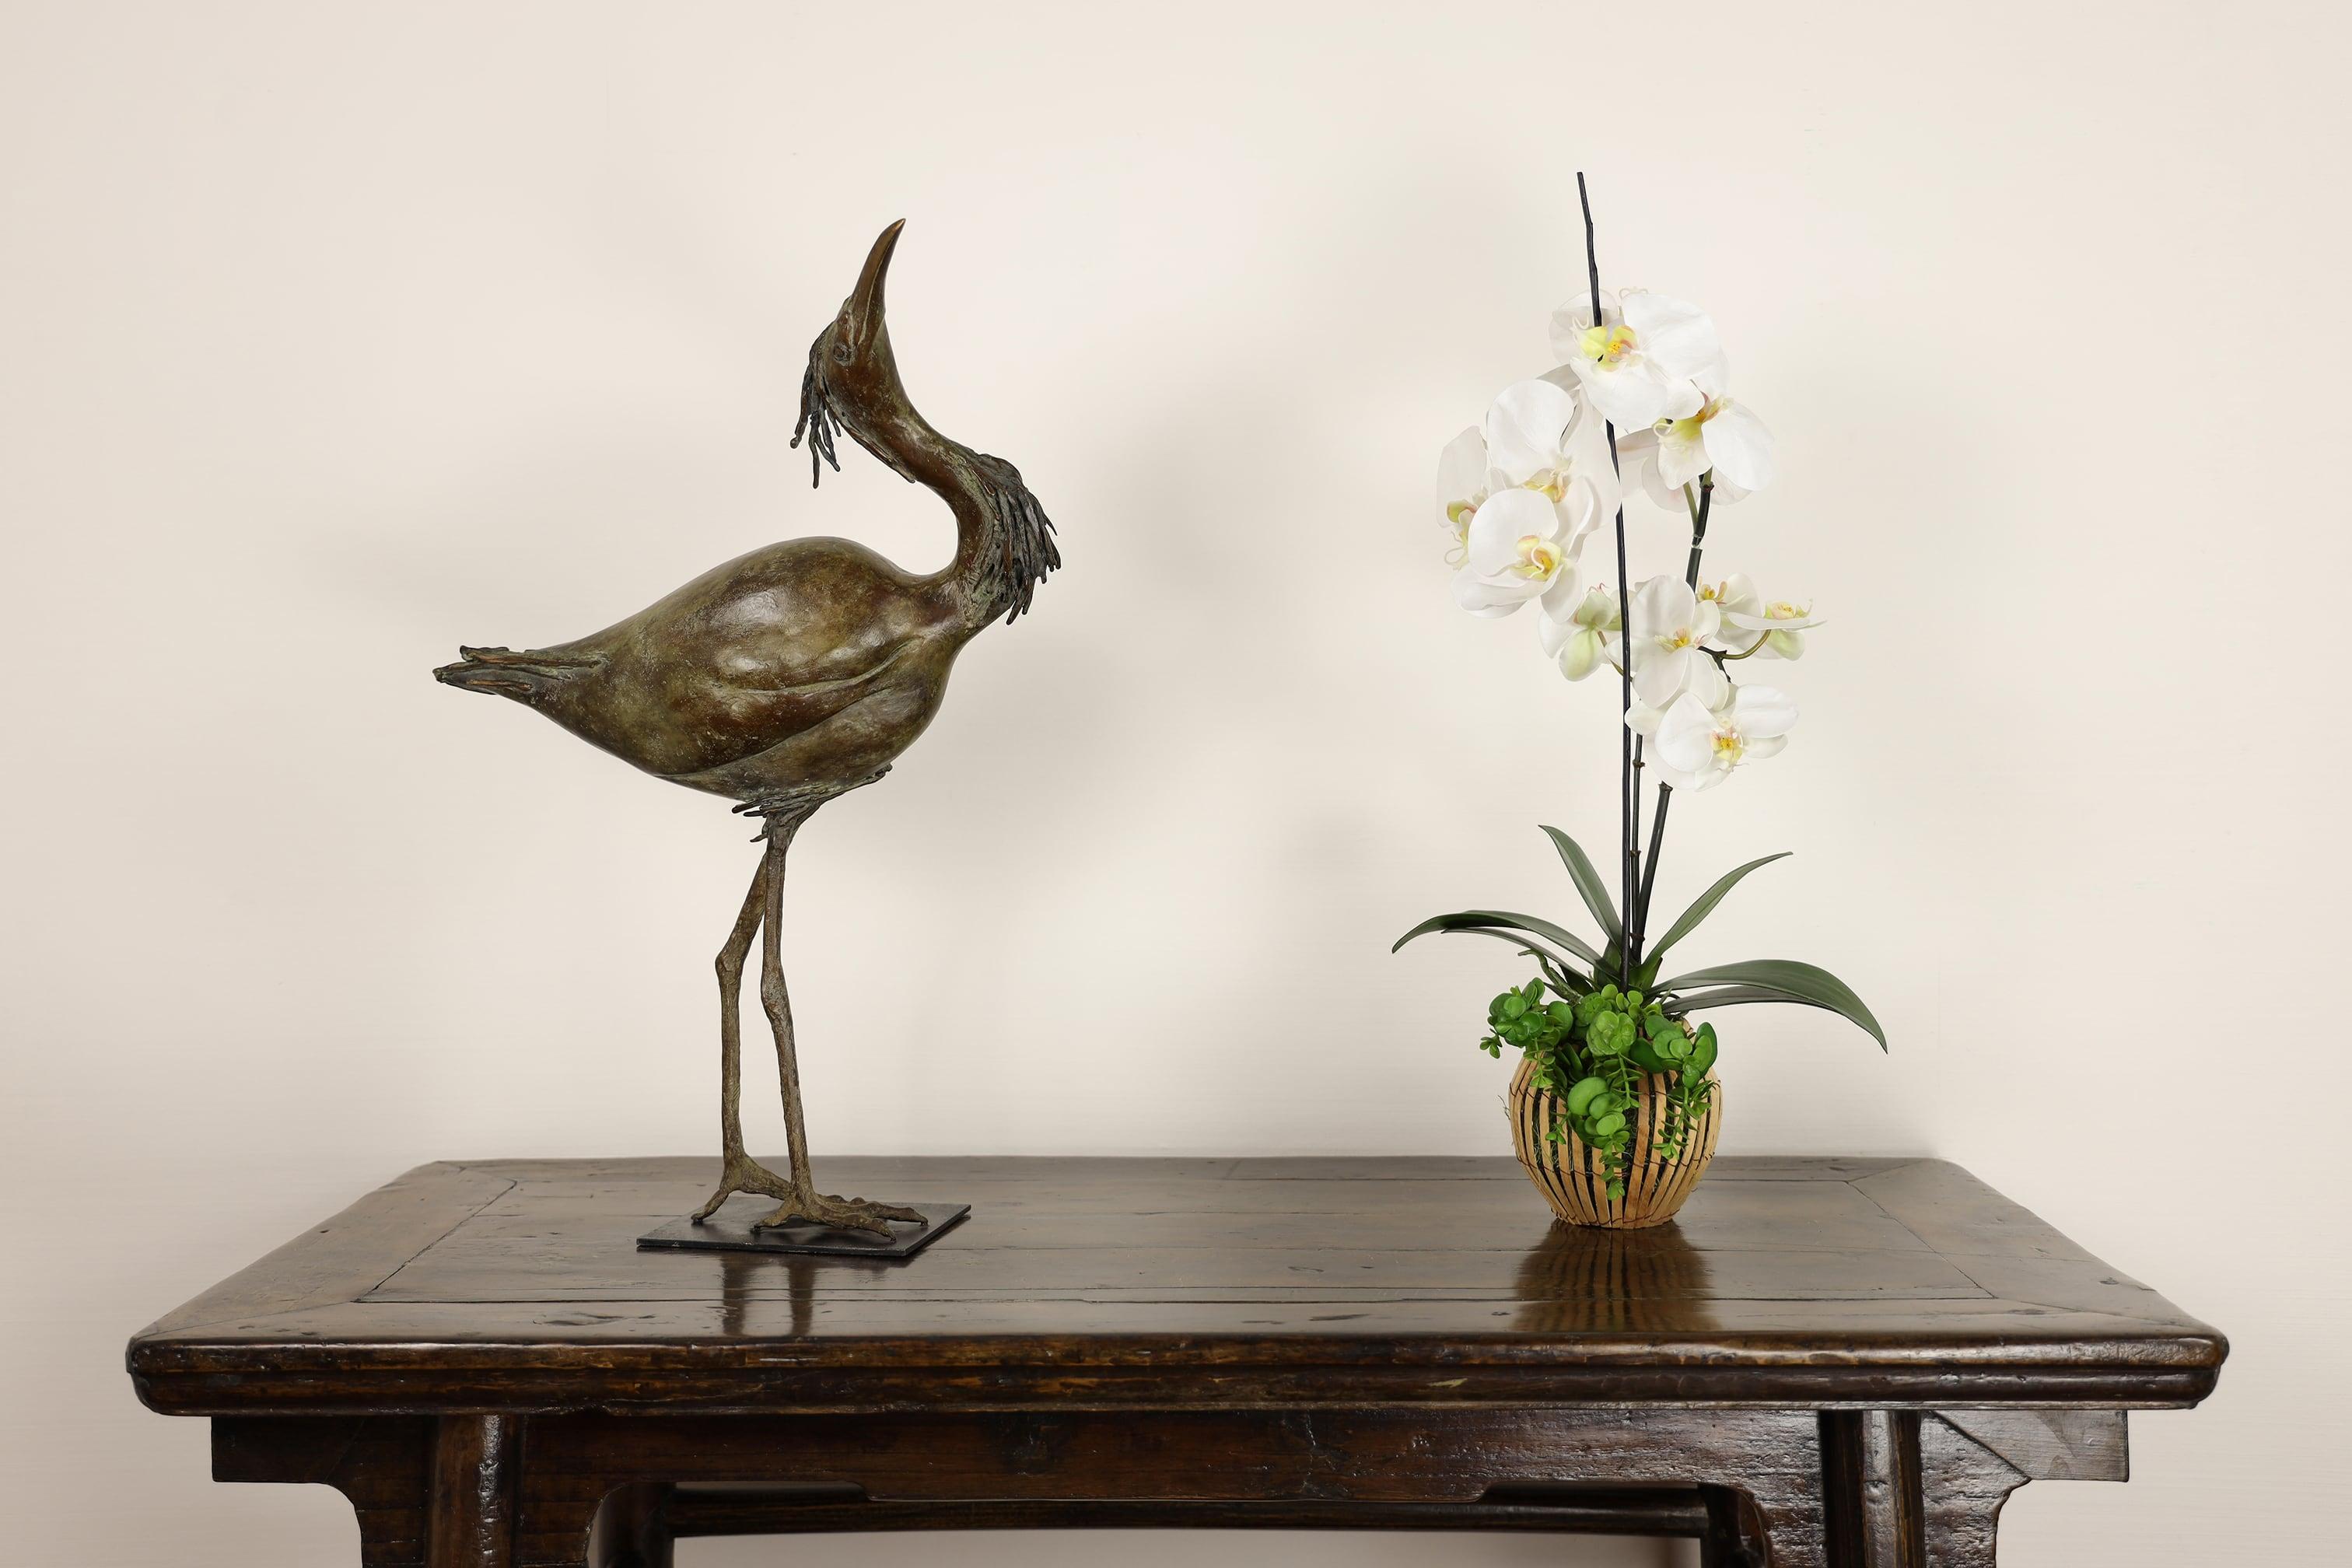 Egret is a unique bronze sculpture by contemporary artist Chésade, dimensions are 60 × 21 × 42 cm (23.6 × 8.3 × 16.5 in). 
The sculpture is signed and comes with a certificate of authenticity.

The sculpture by Chésade is a part of this new